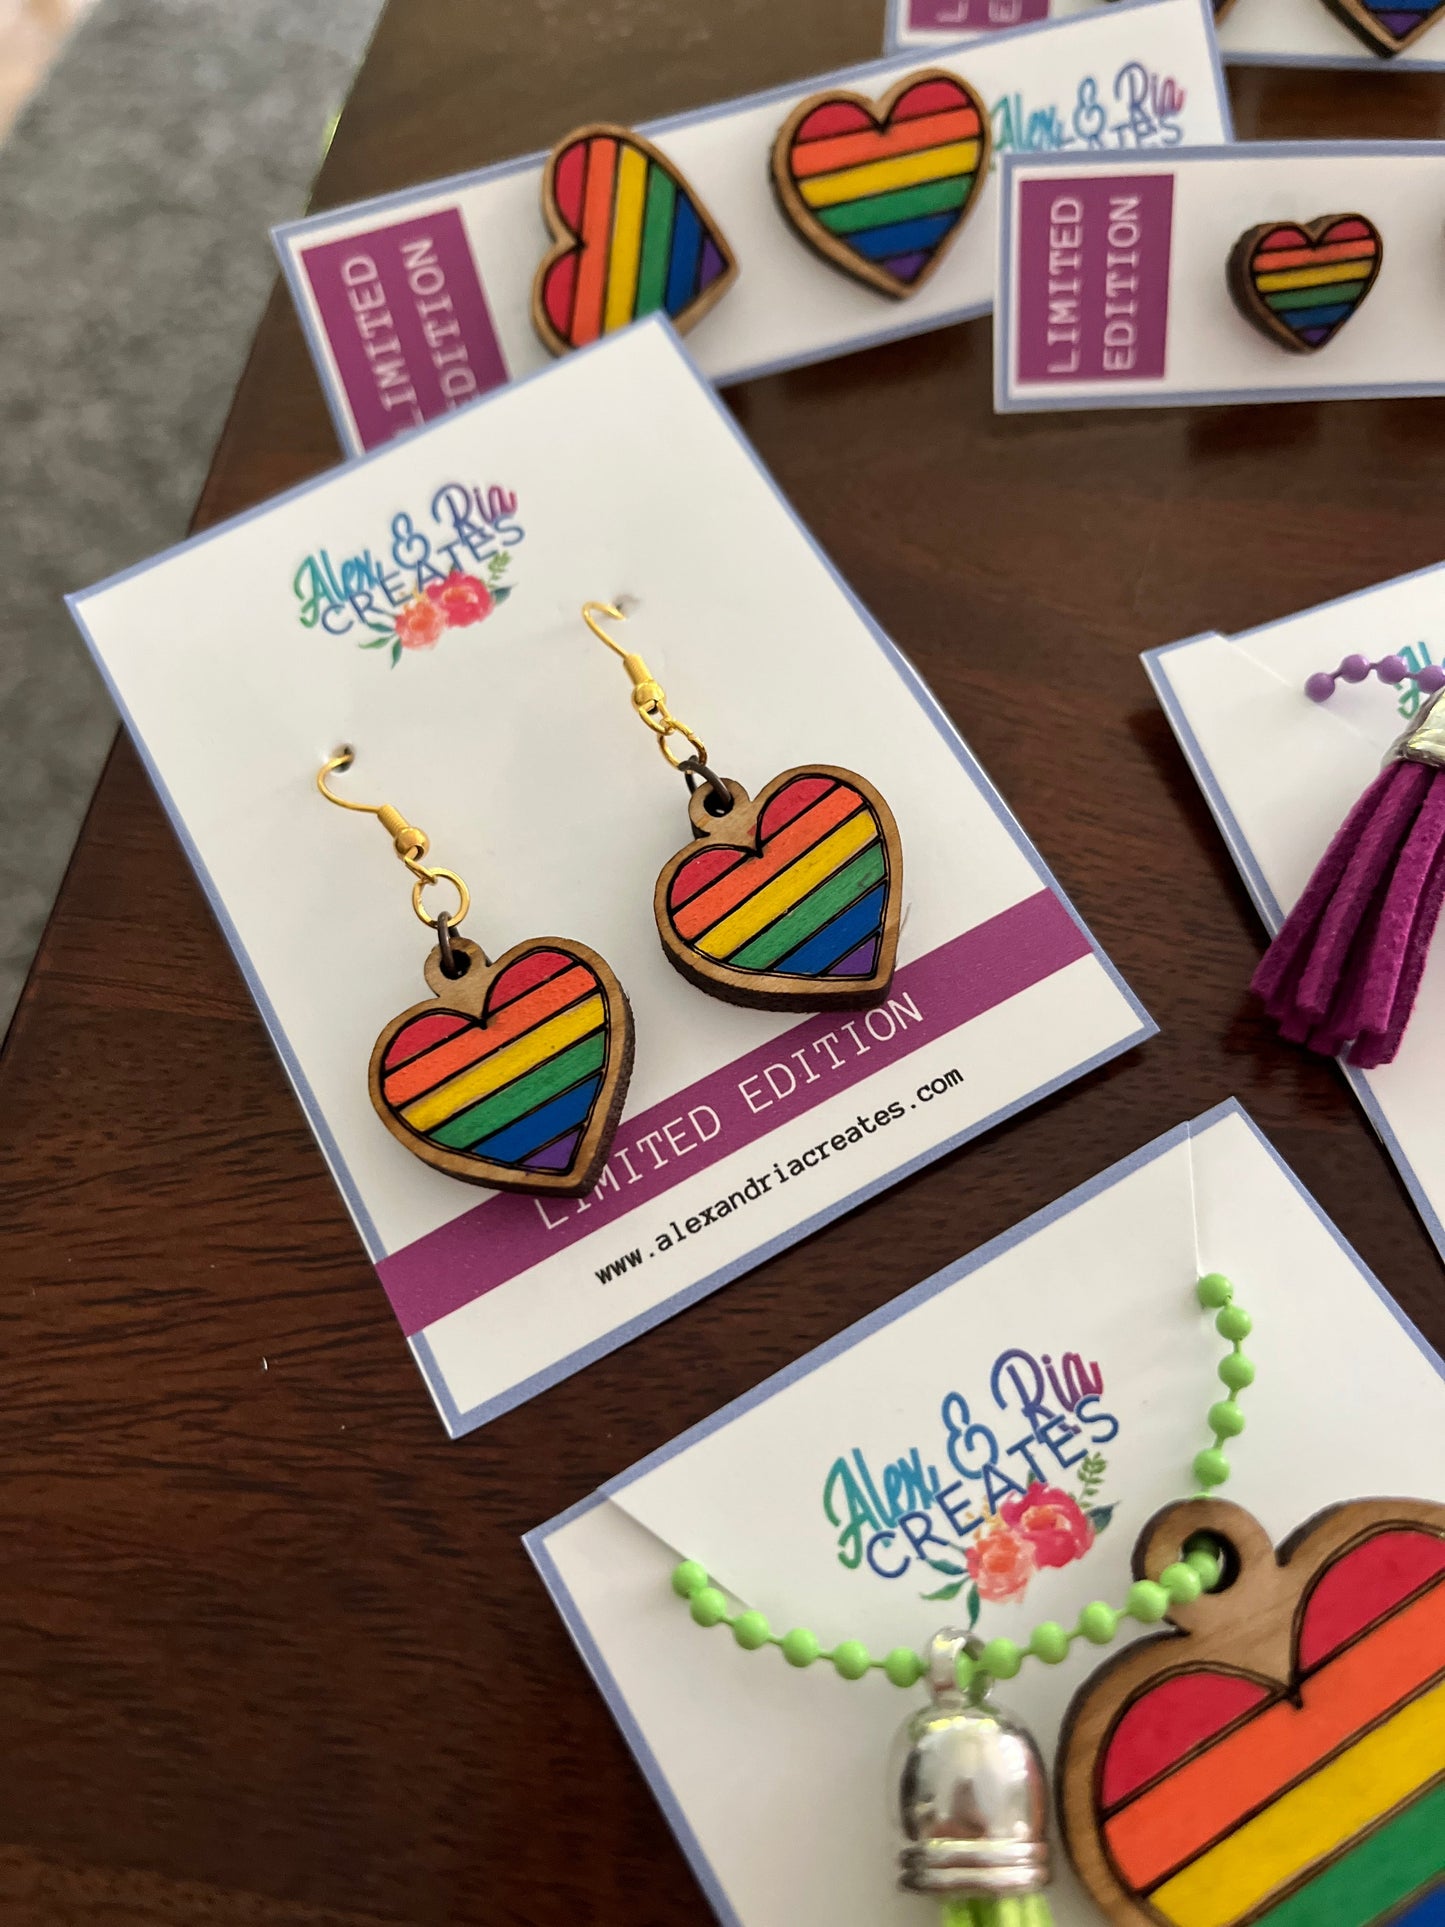 Limited Edition - Pride Heart Collection - Studs